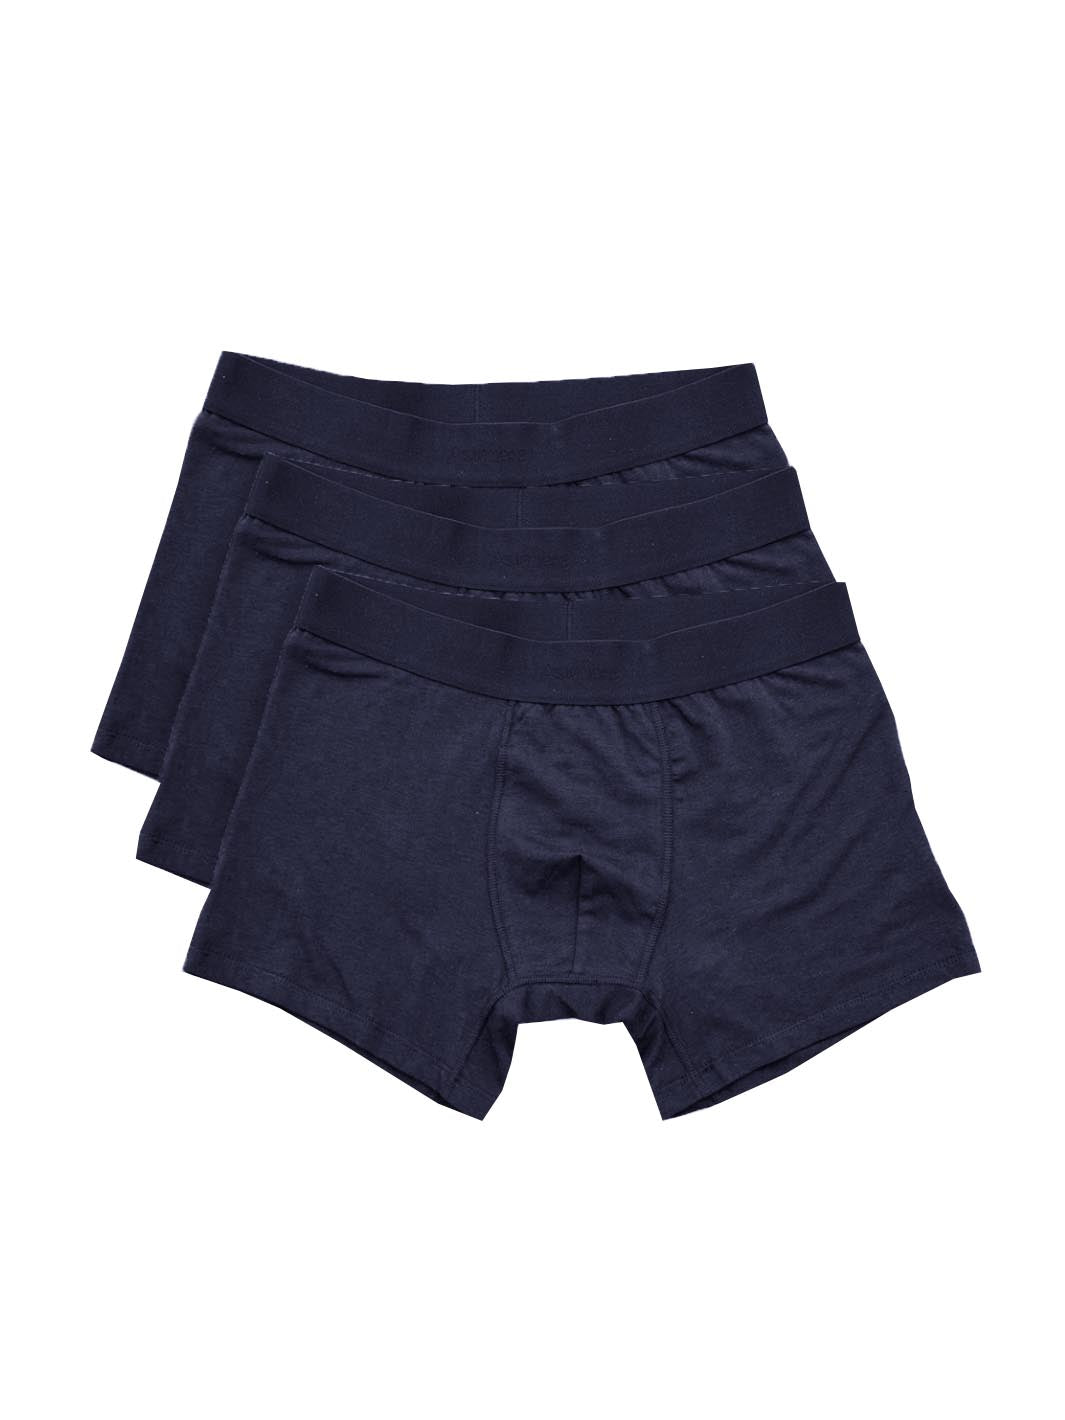 Boxer Brief 3-Pack - Navy